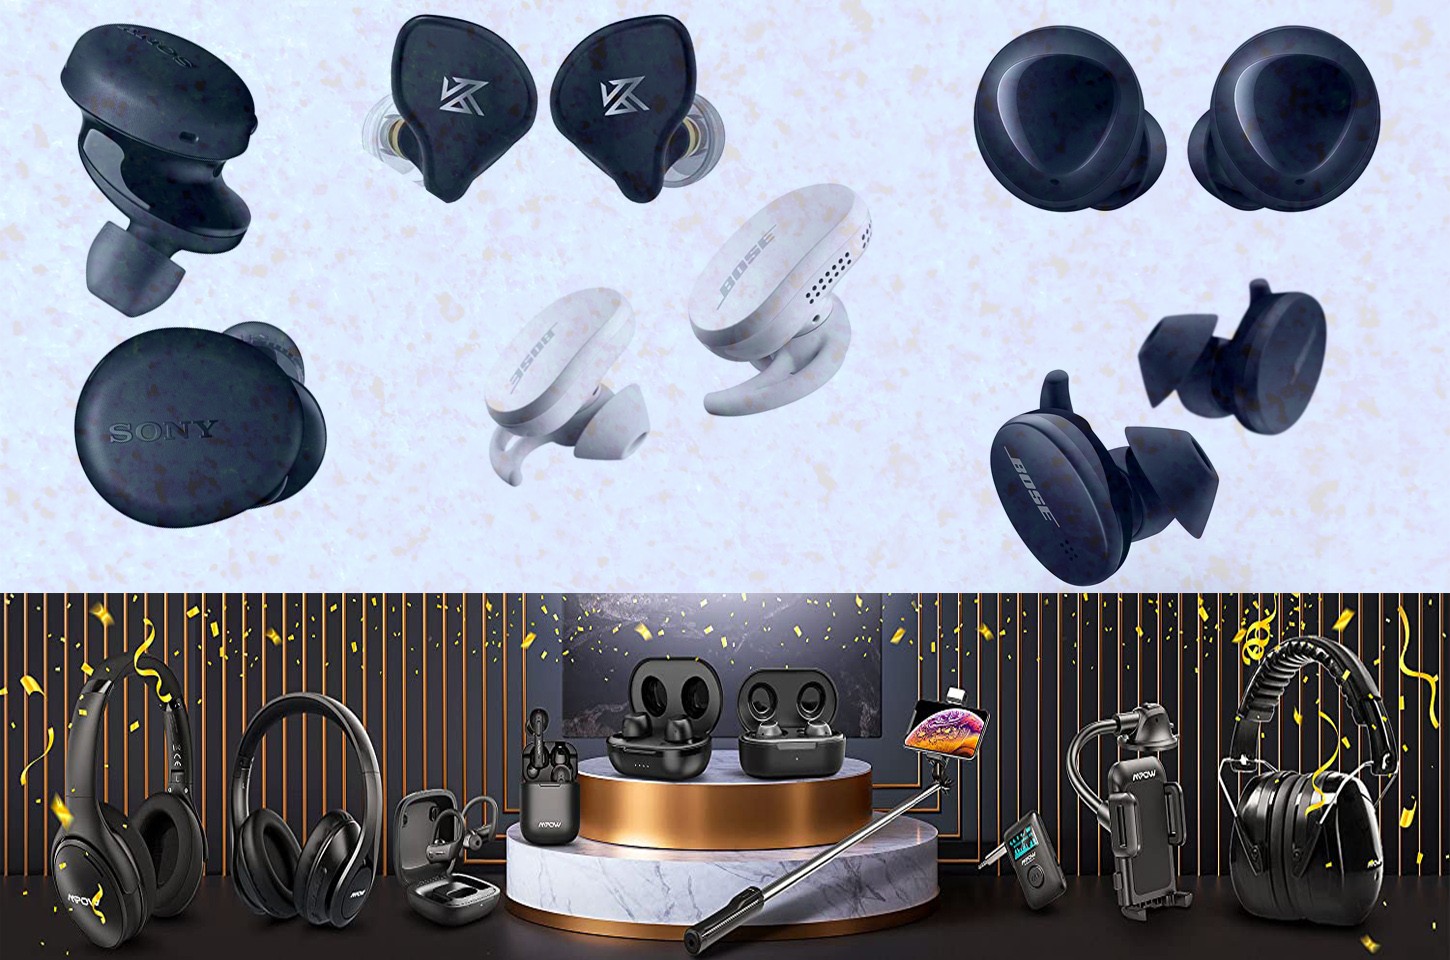 Best wireless earbuds 2021: your definitive guide to the best choice